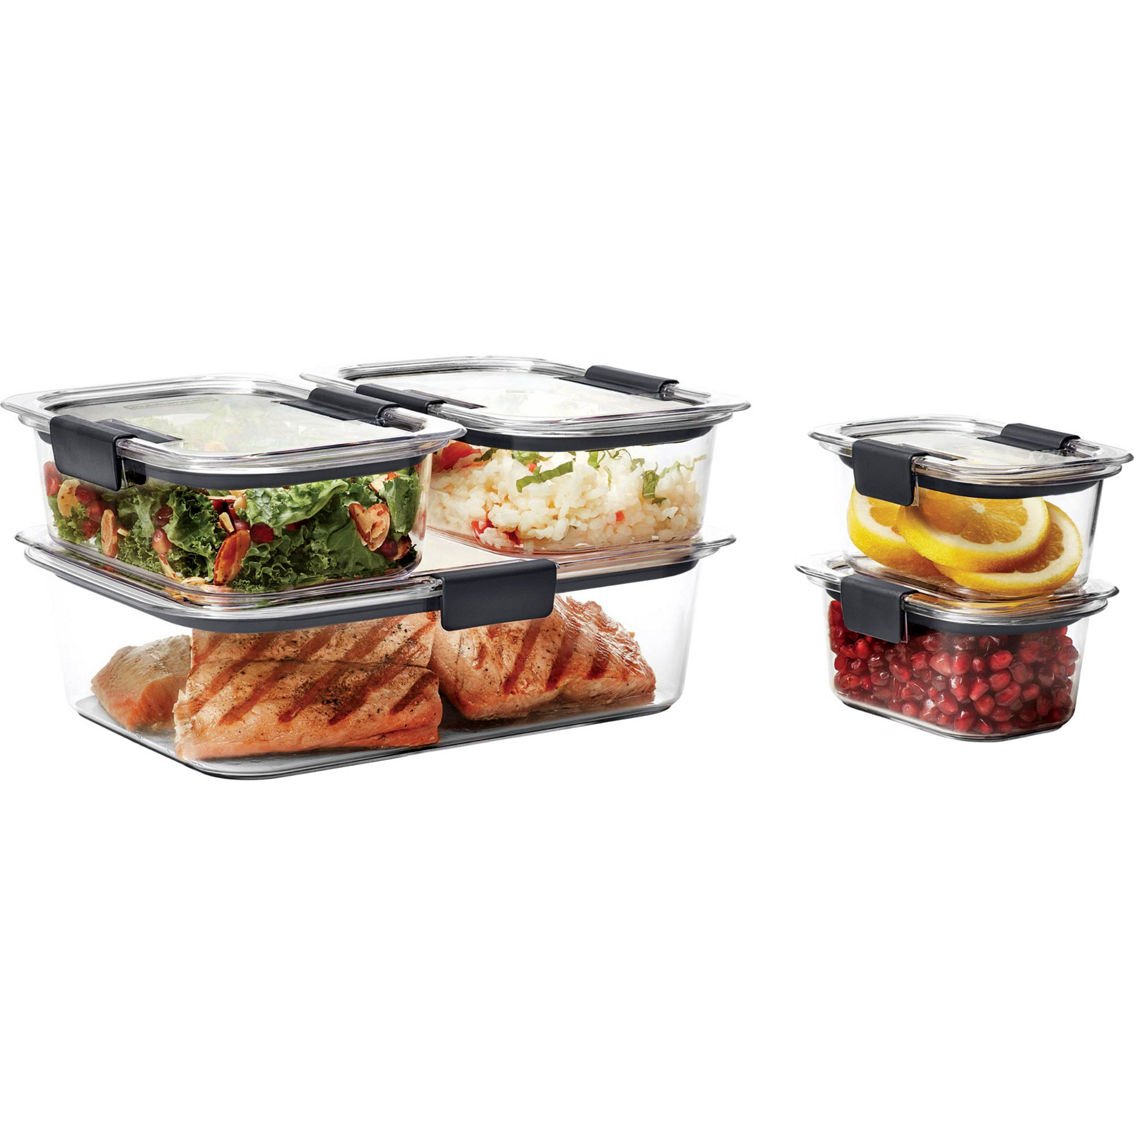 Rubbermaid Brilliance Food Storage 10 pc. Container Set - Image 3 of 3